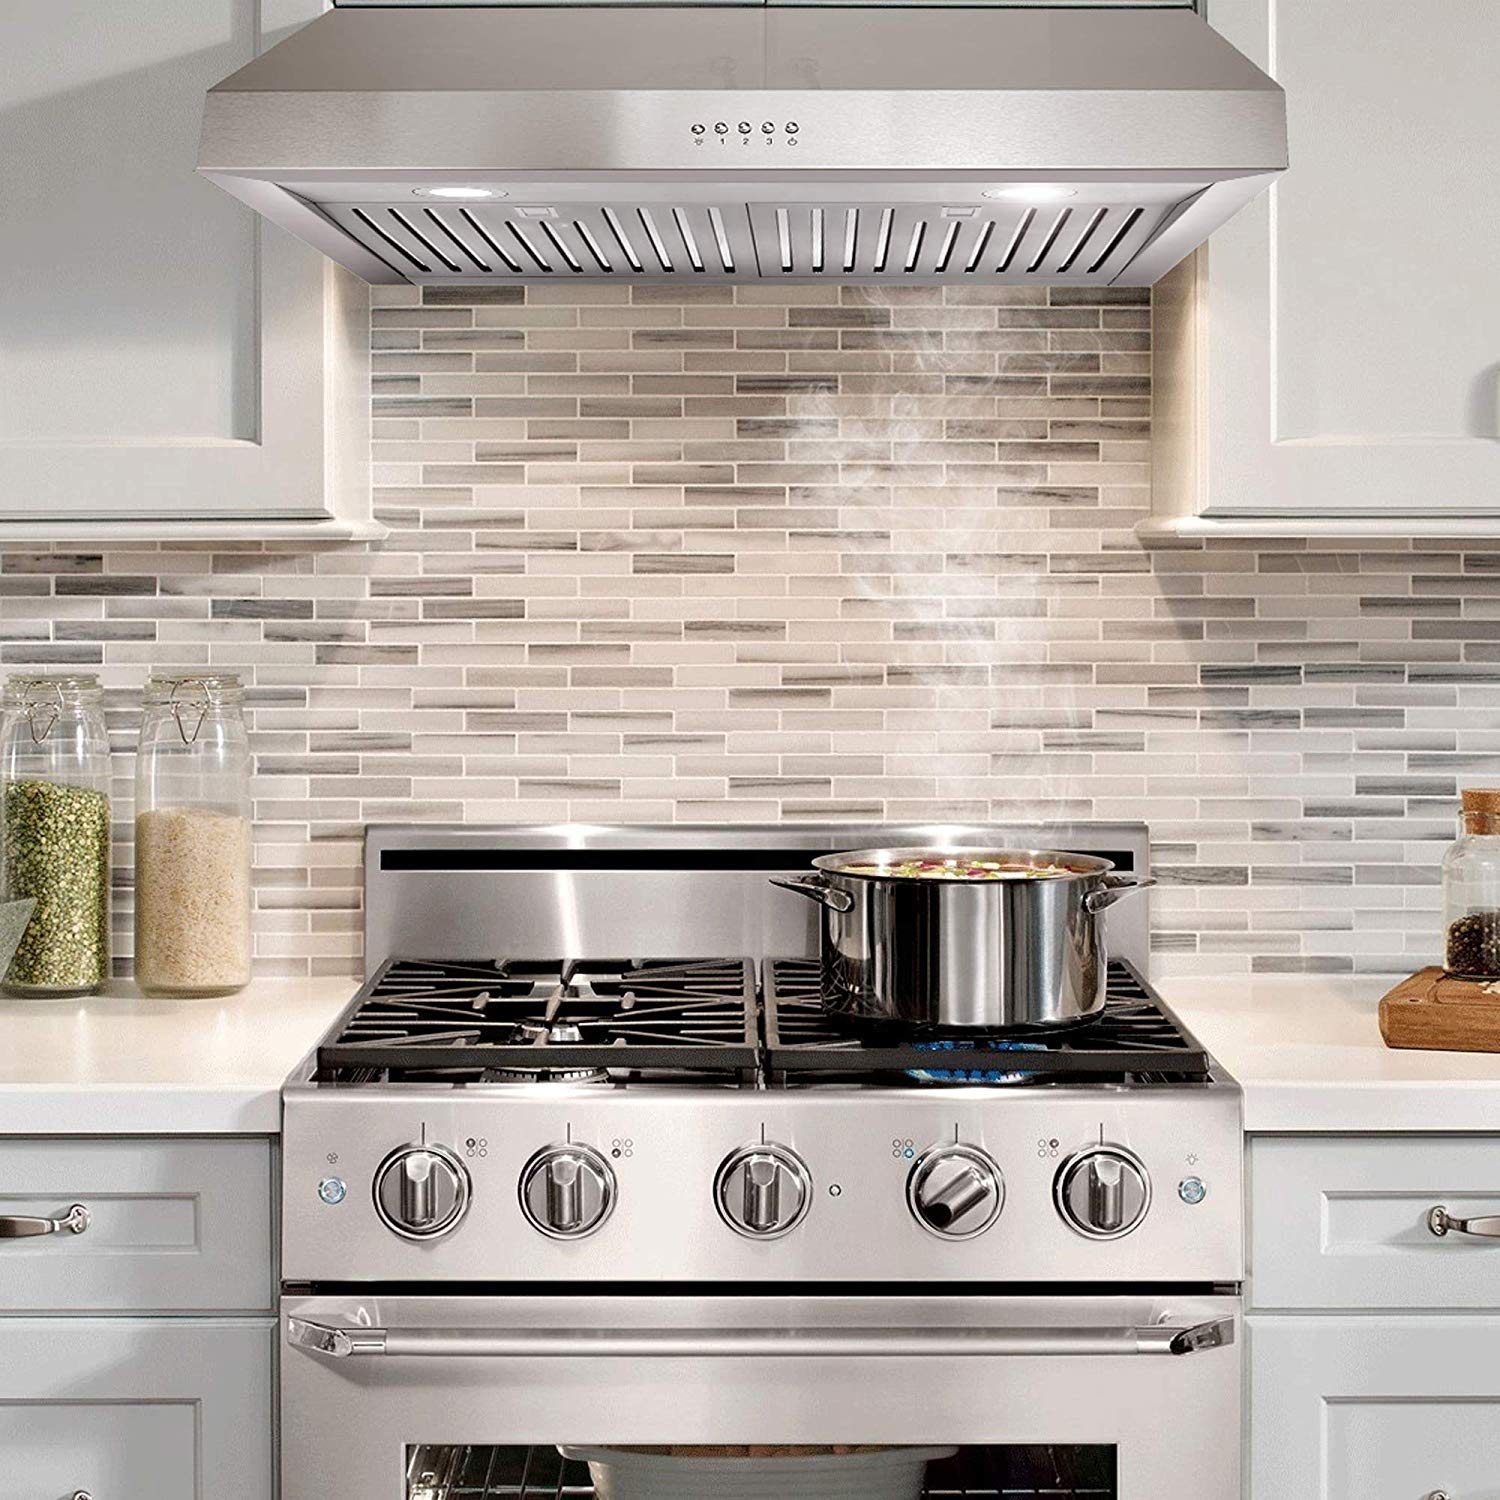 How High Should An Exhaust Fan Be Above The Stove